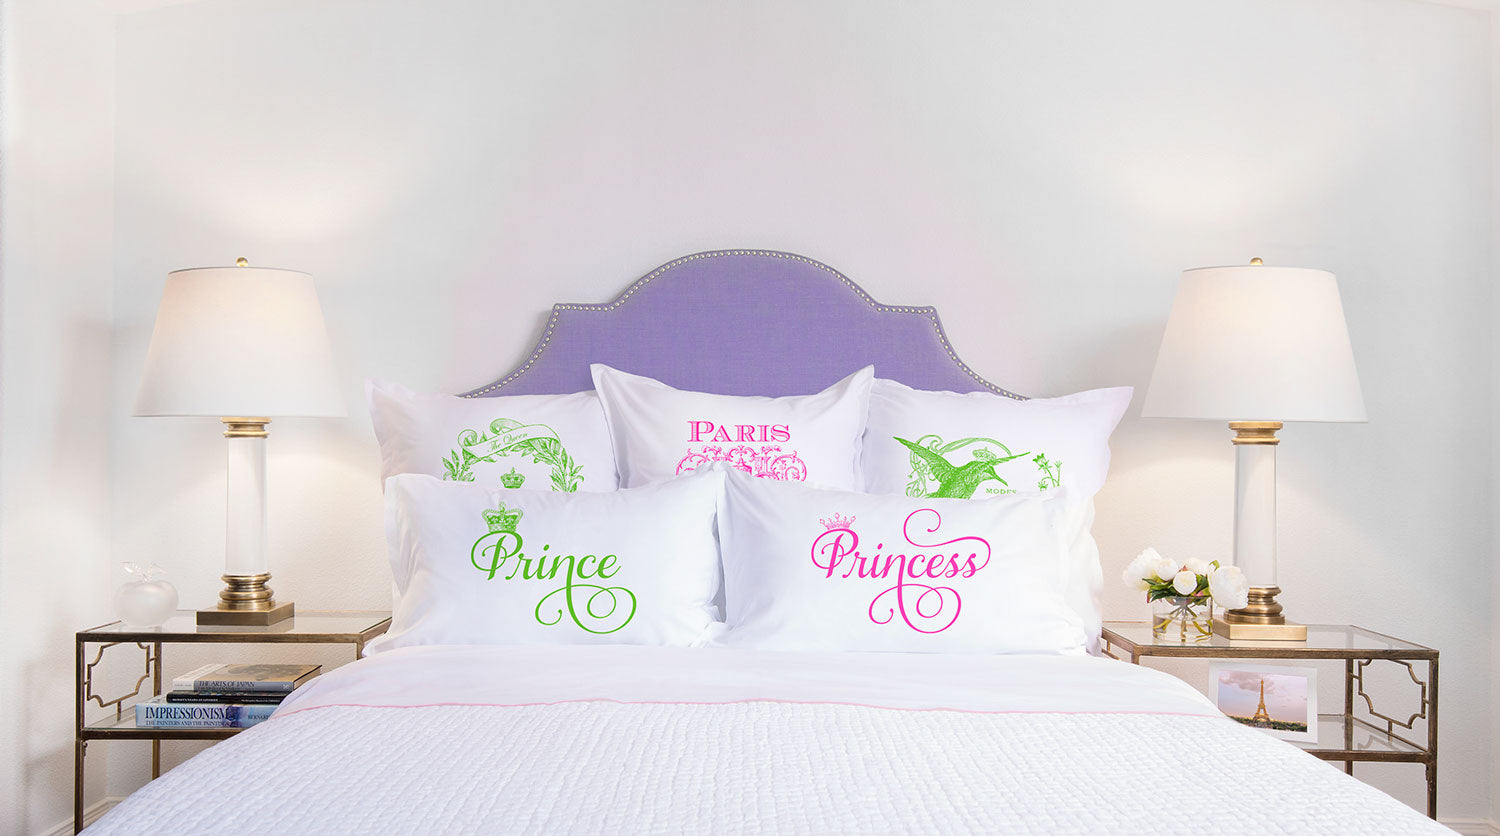 Prince, Princess - His & Hers Pillowcase Collection-Di Lewis